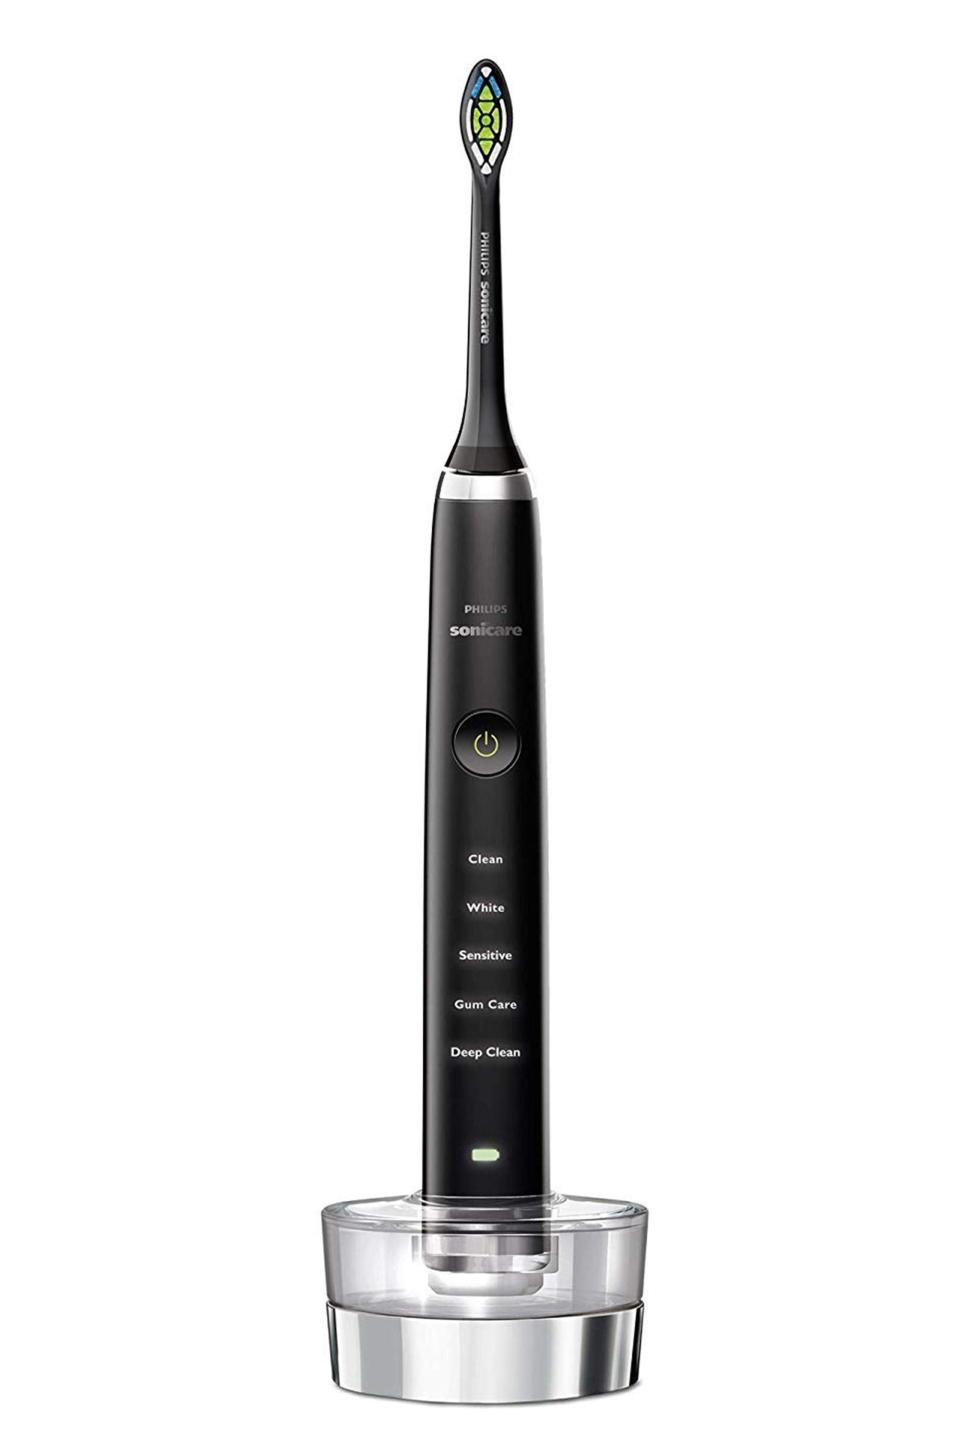 69) Philips Sonicare DiamondClean Classic Rechargeable Electric Toothbrush